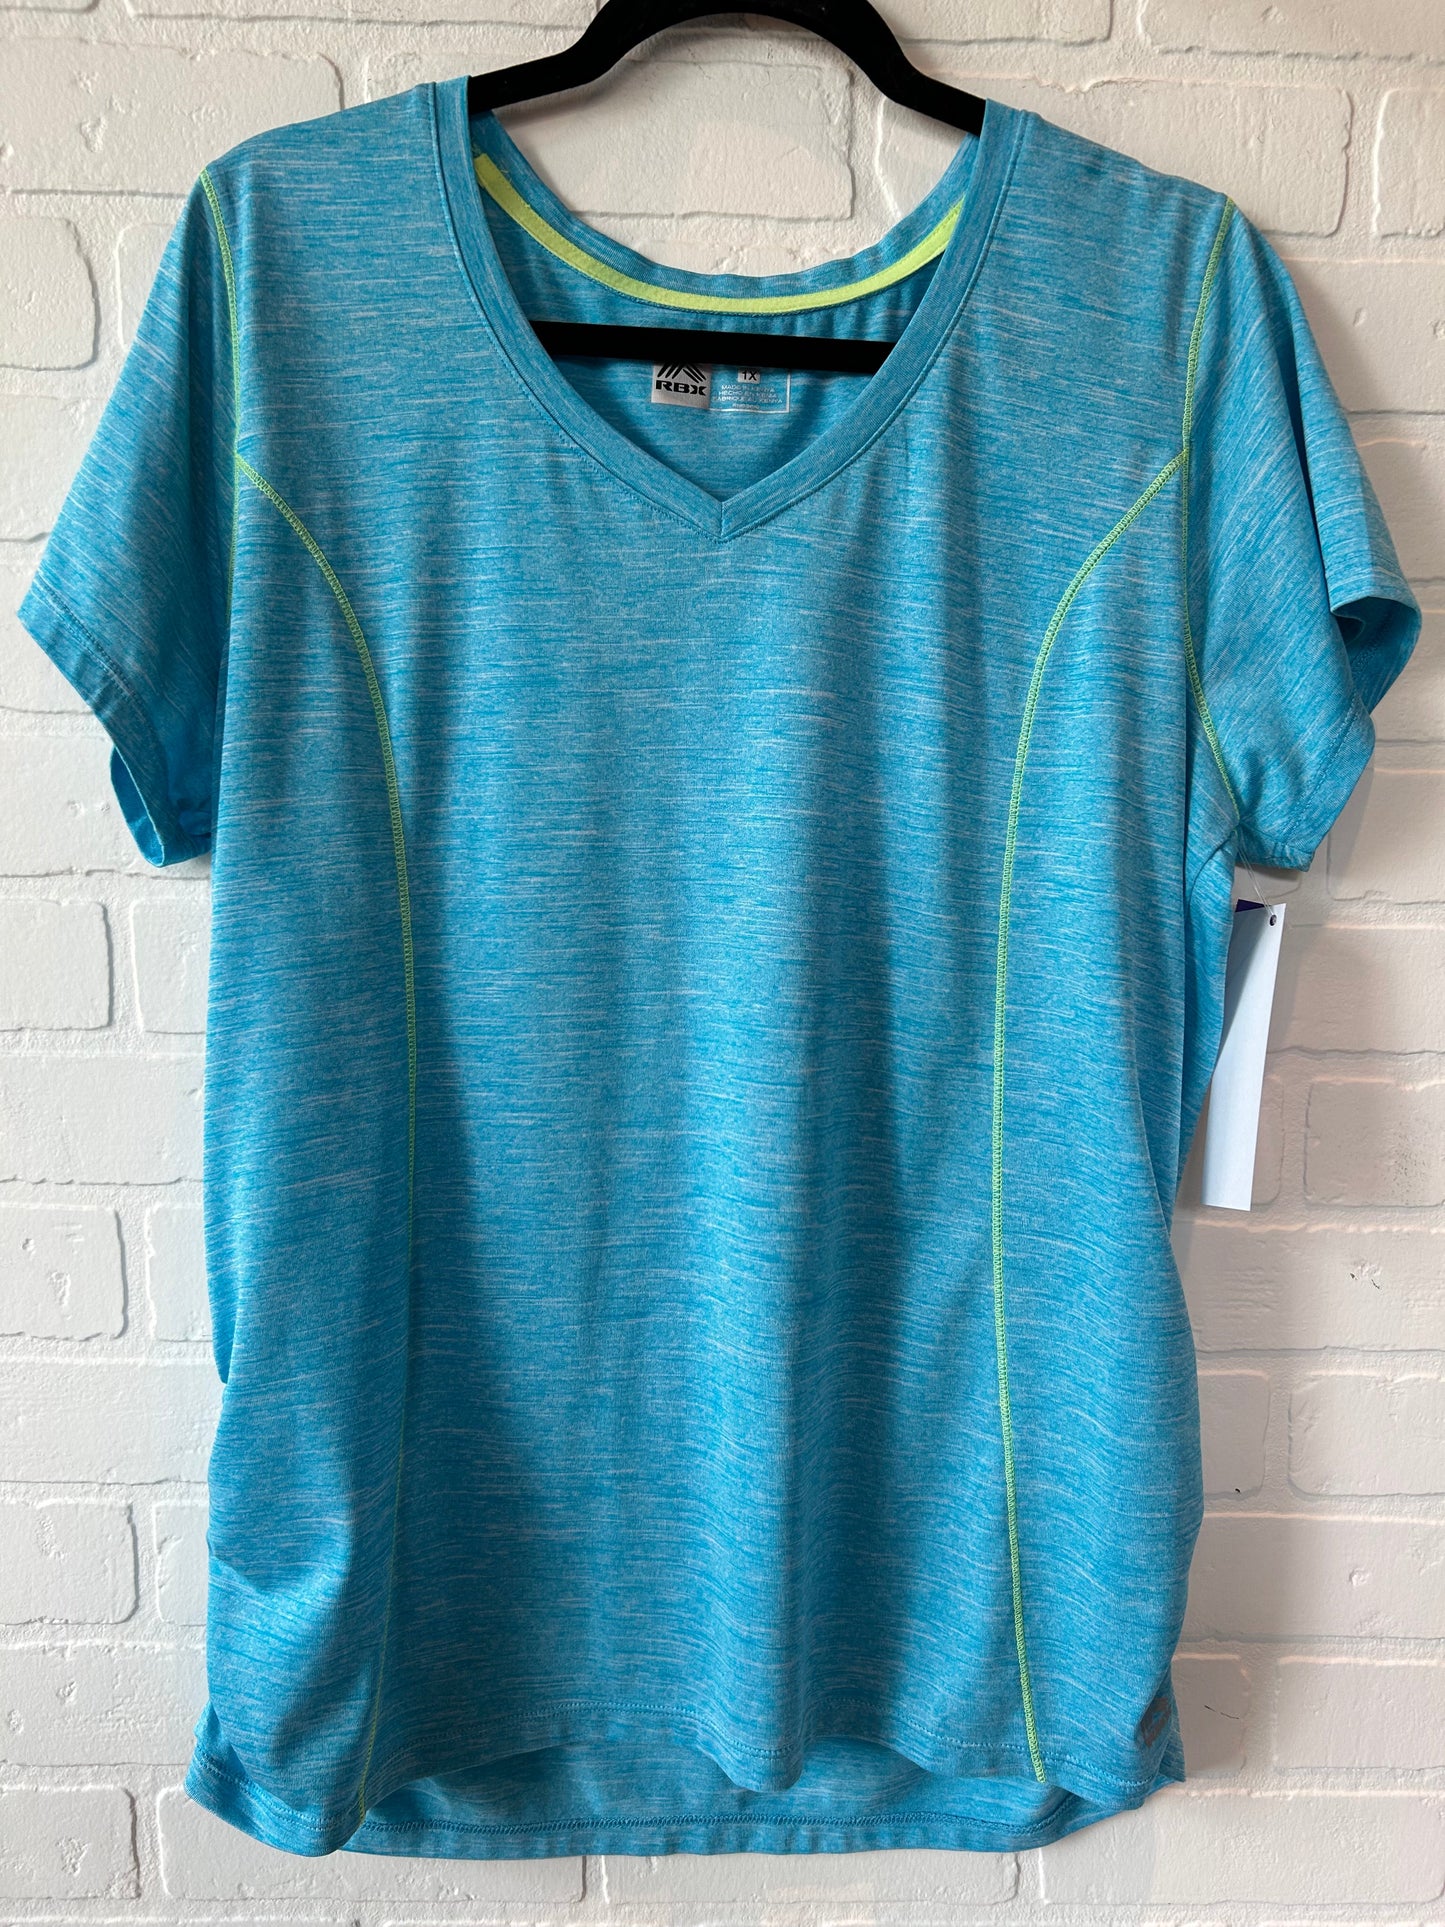 Blue Athletic Top Short Sleeve Rbx, Size 1x